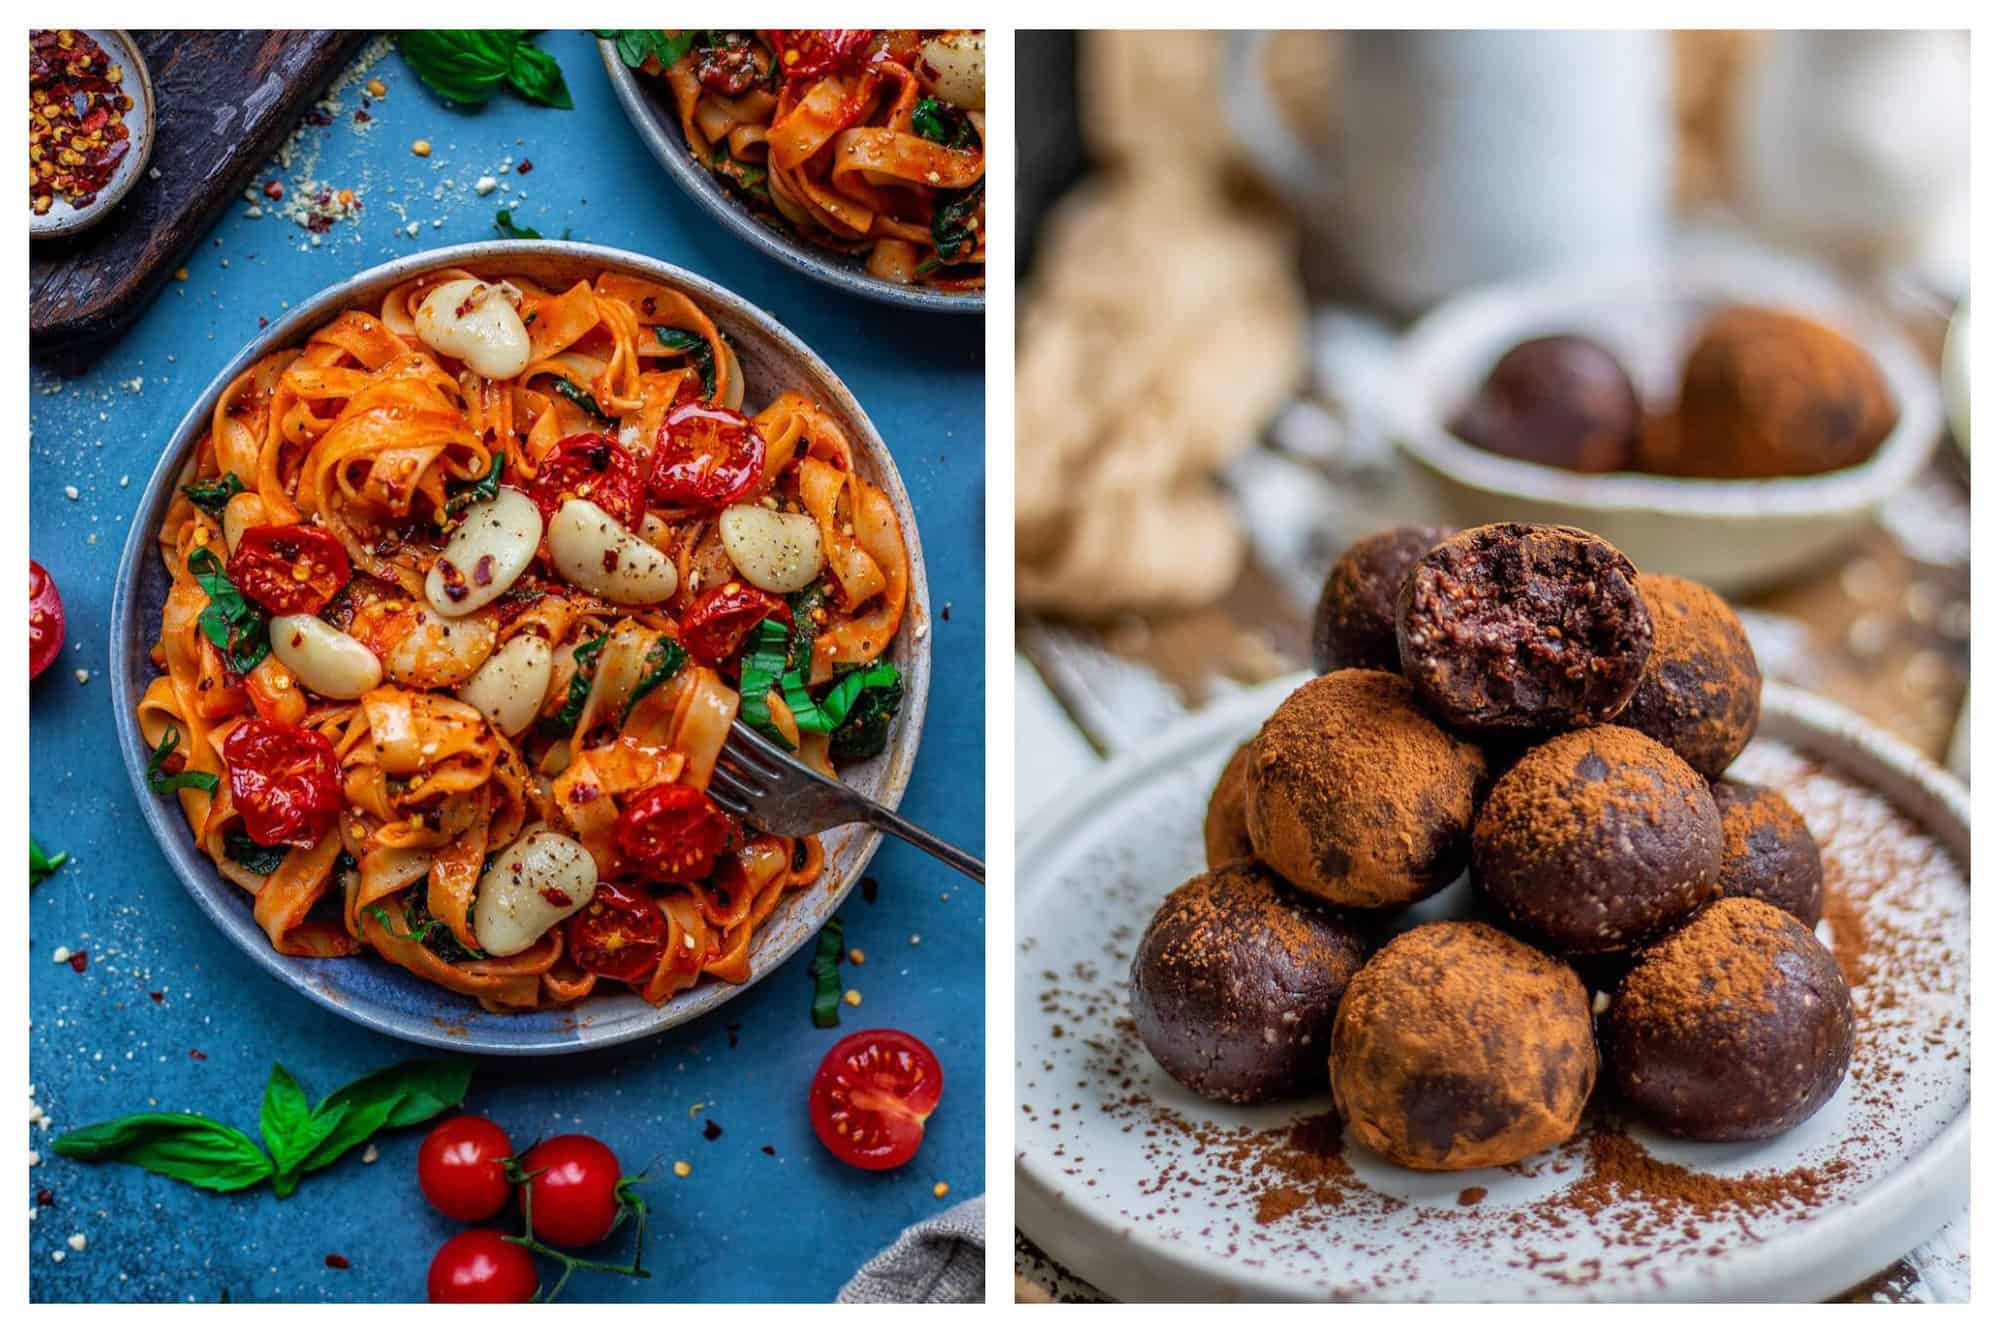 Left: Pasta with white beans, tomatoes and basil. Right: Chocolate truffles. 